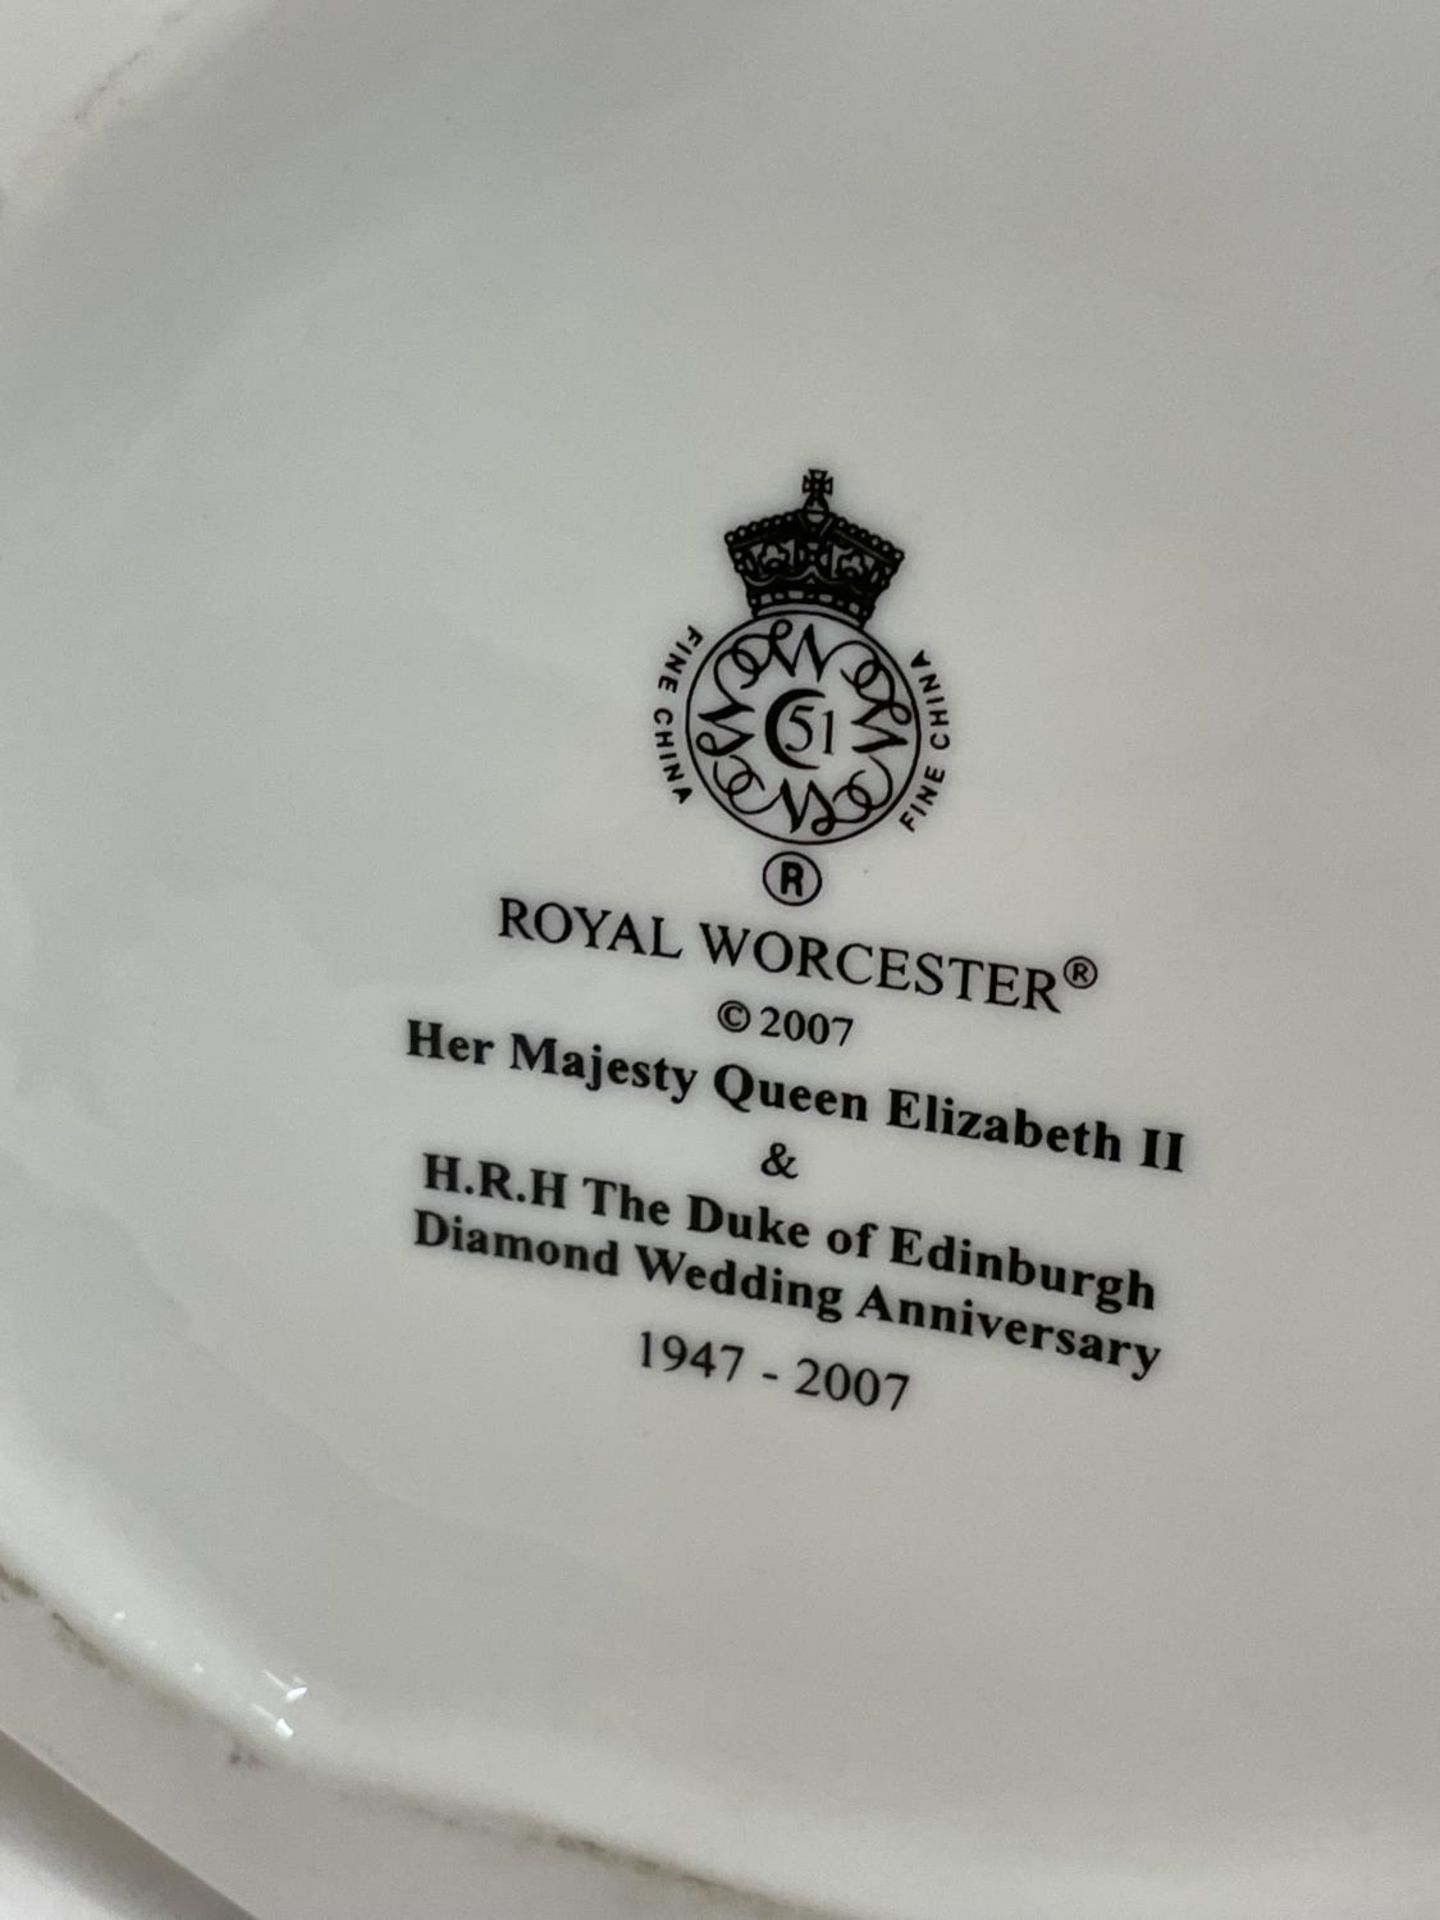 A ROYAL WORCESTER 2007 FIGURE OF THE QUEEN TO CELEBRATE HER DIAMOND WEDDING ANNIVERSARY - Image 4 of 4